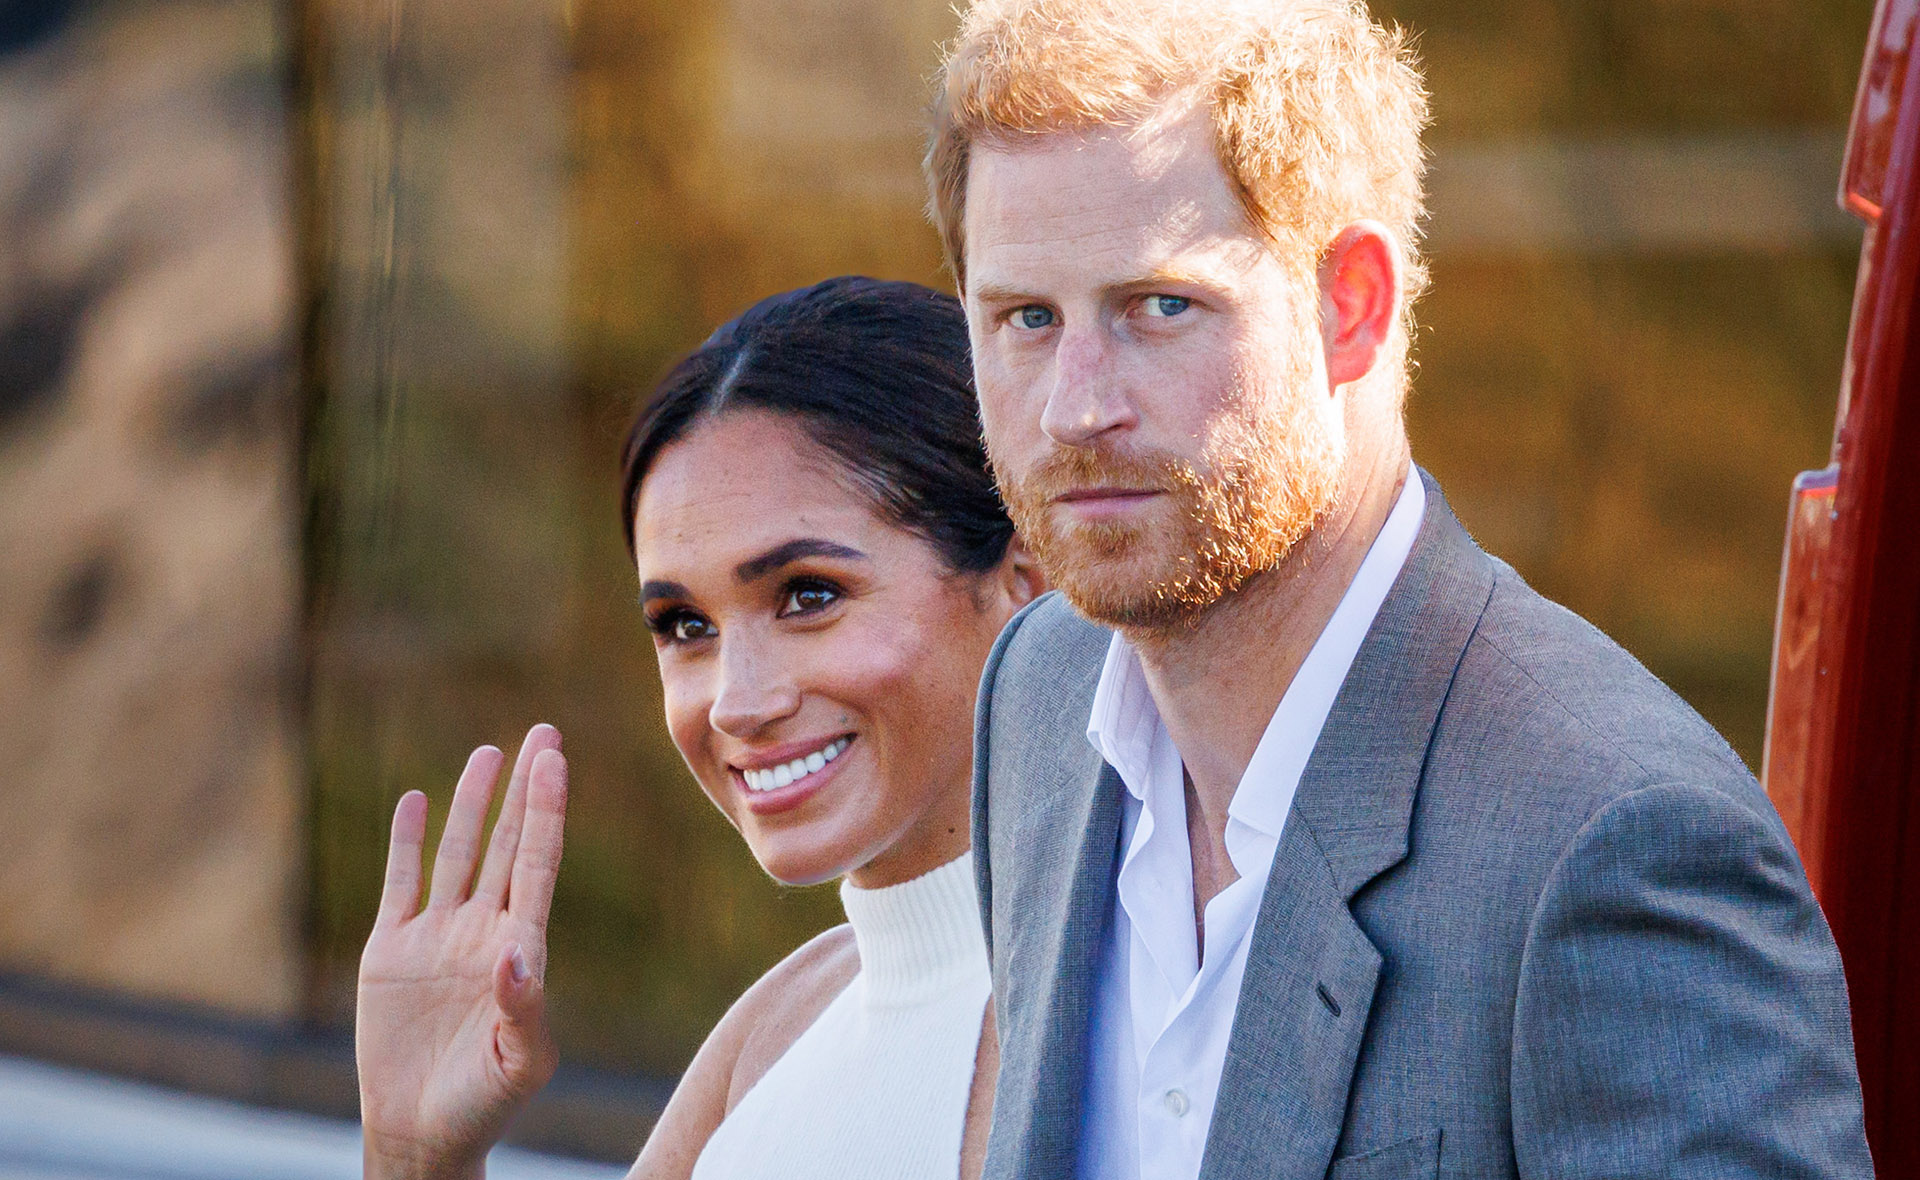 Prince Harry and Meghan Markle fire PR team as news leaks they’re looking for a new mansion home